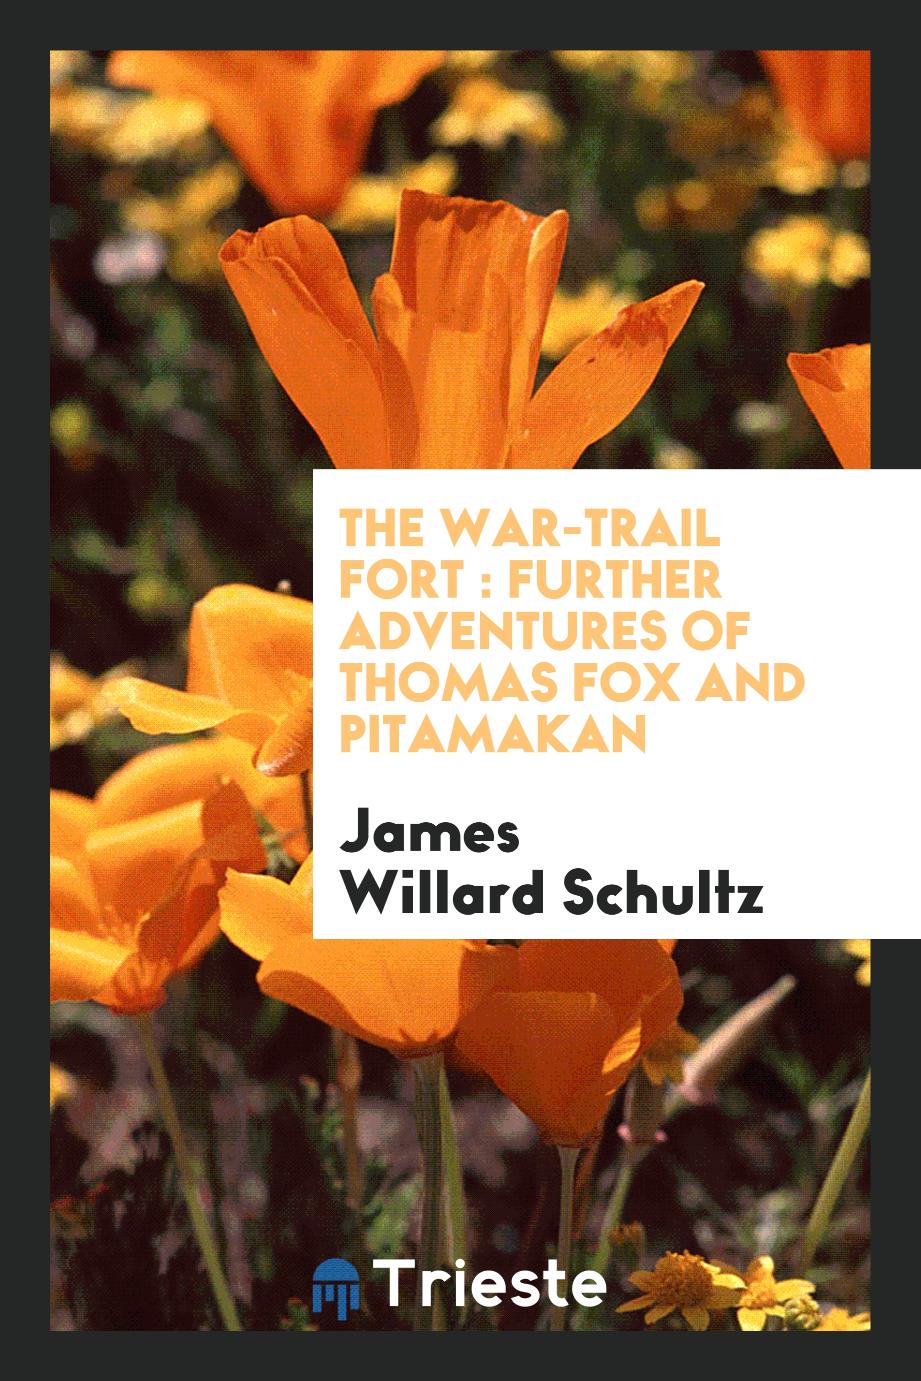 The war-trail fort : further adventures of Thomas Fox and Pitamakan